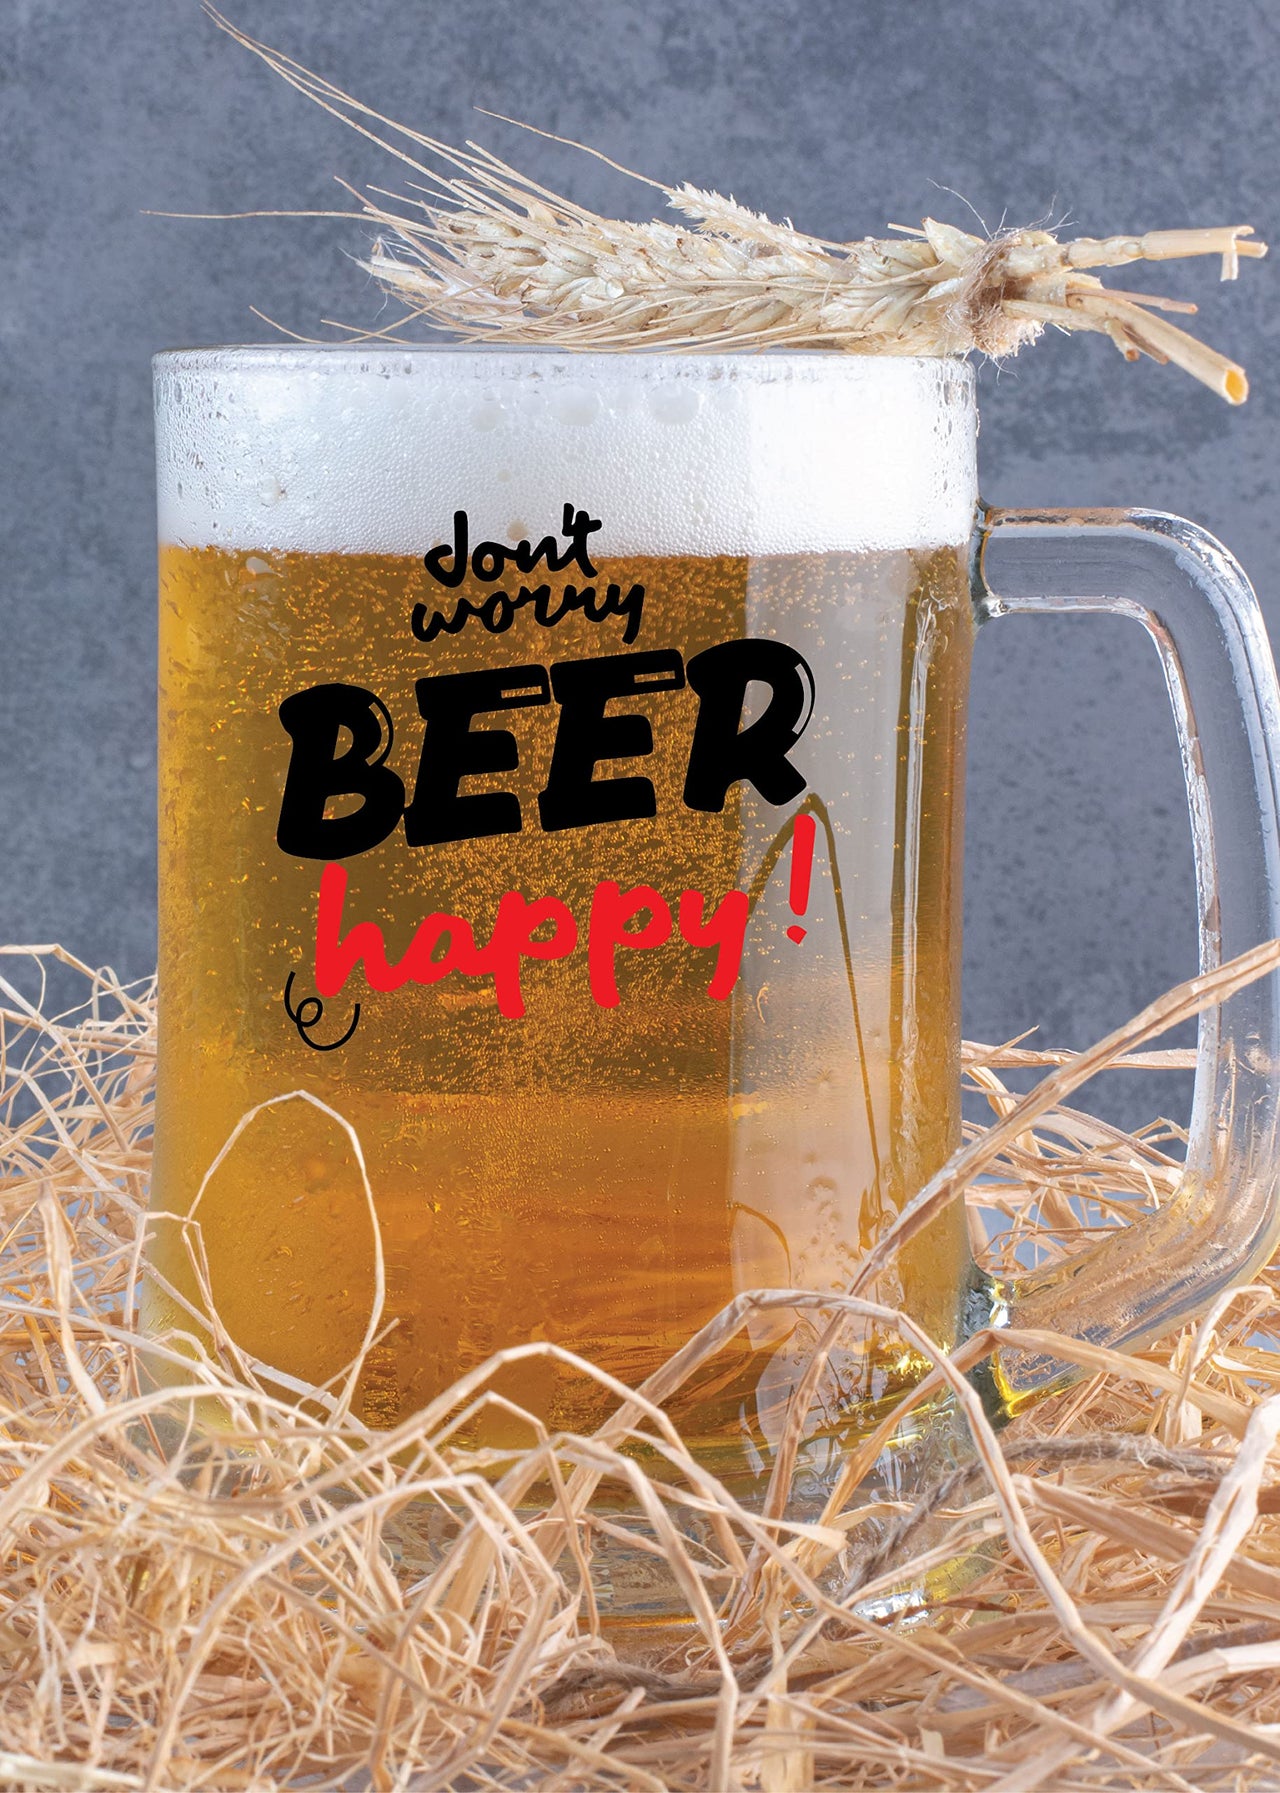 Don’t Worry Beer Happy-Beer Mug -1 Piece, Clear, 500 ml - Transparent Glass Beer Mug-Printed Beer Mug with Handle Gift for Men